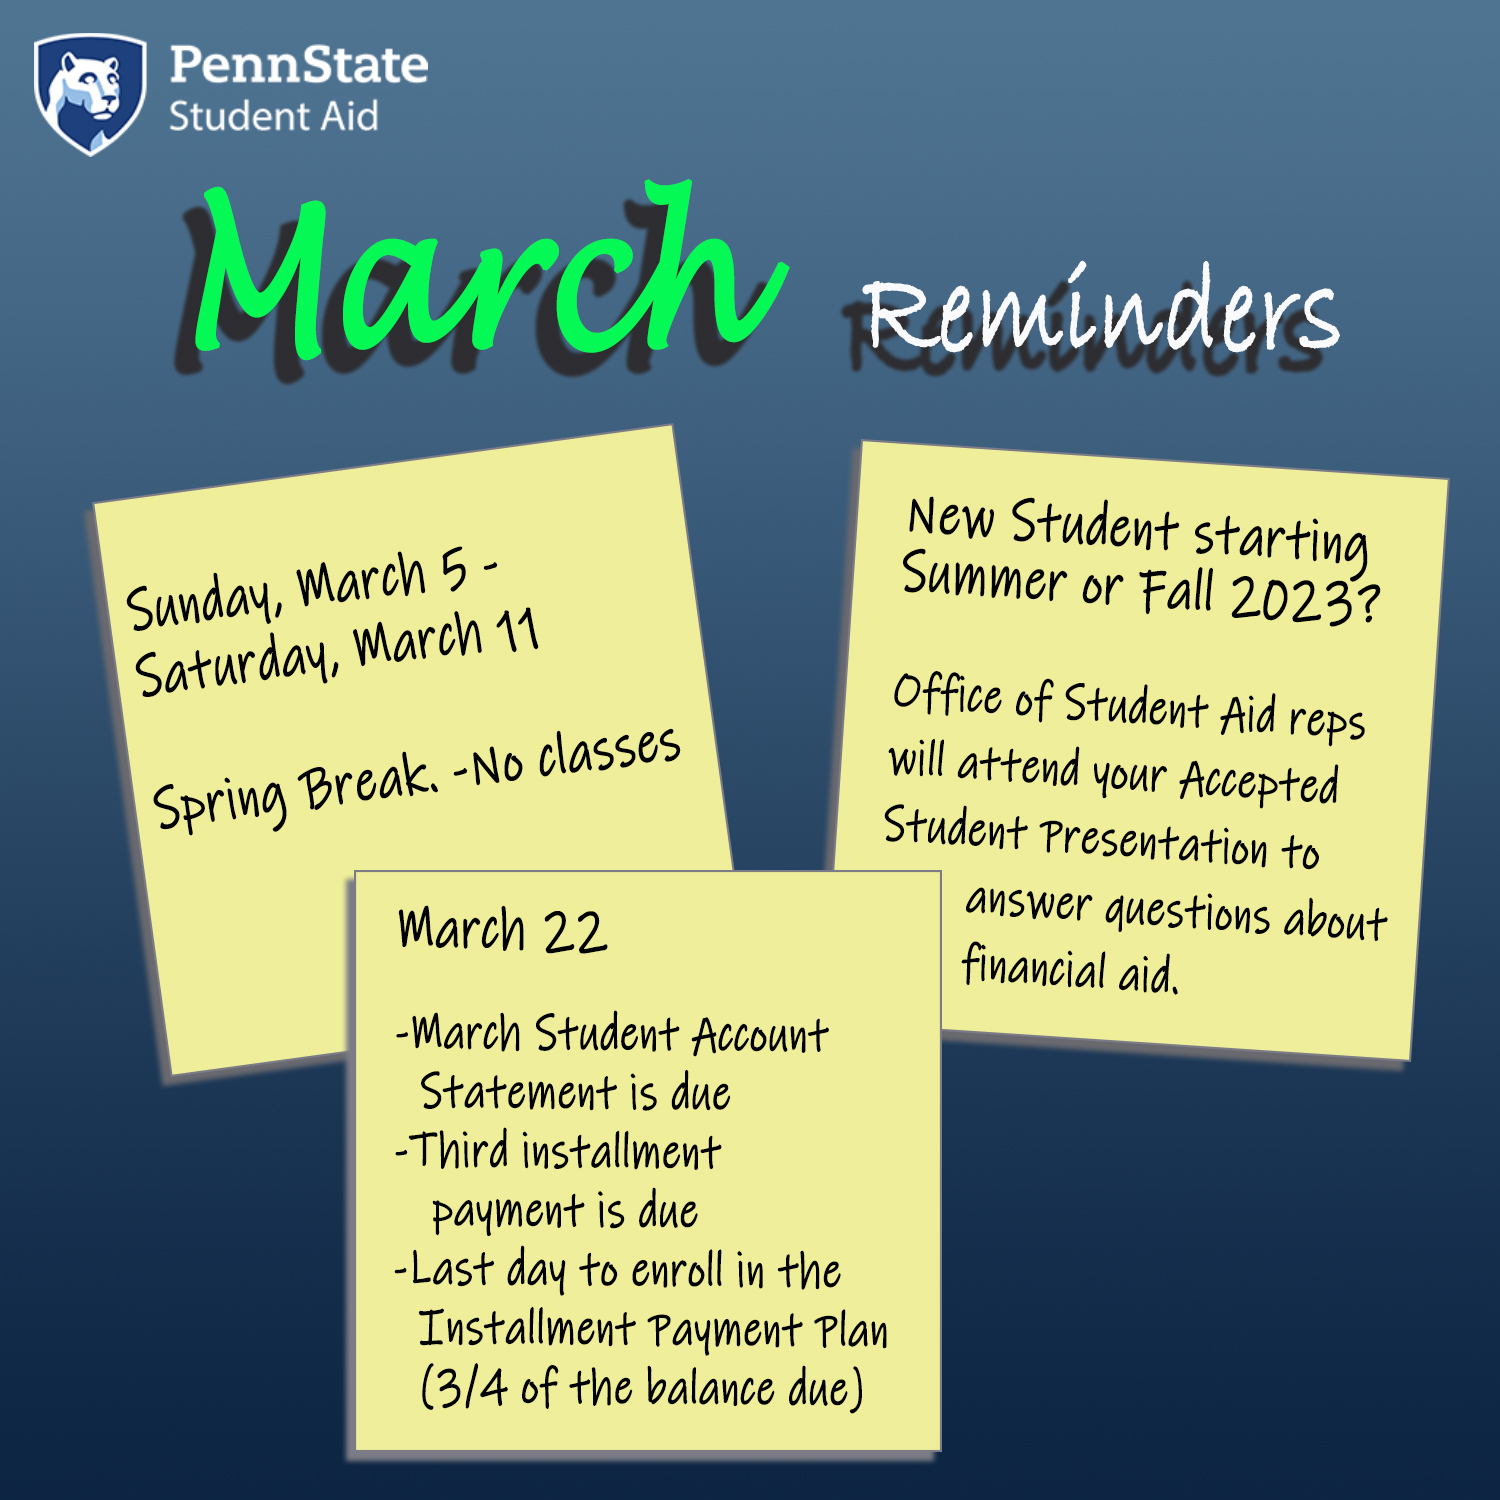 Financial Aid related reminders for March.